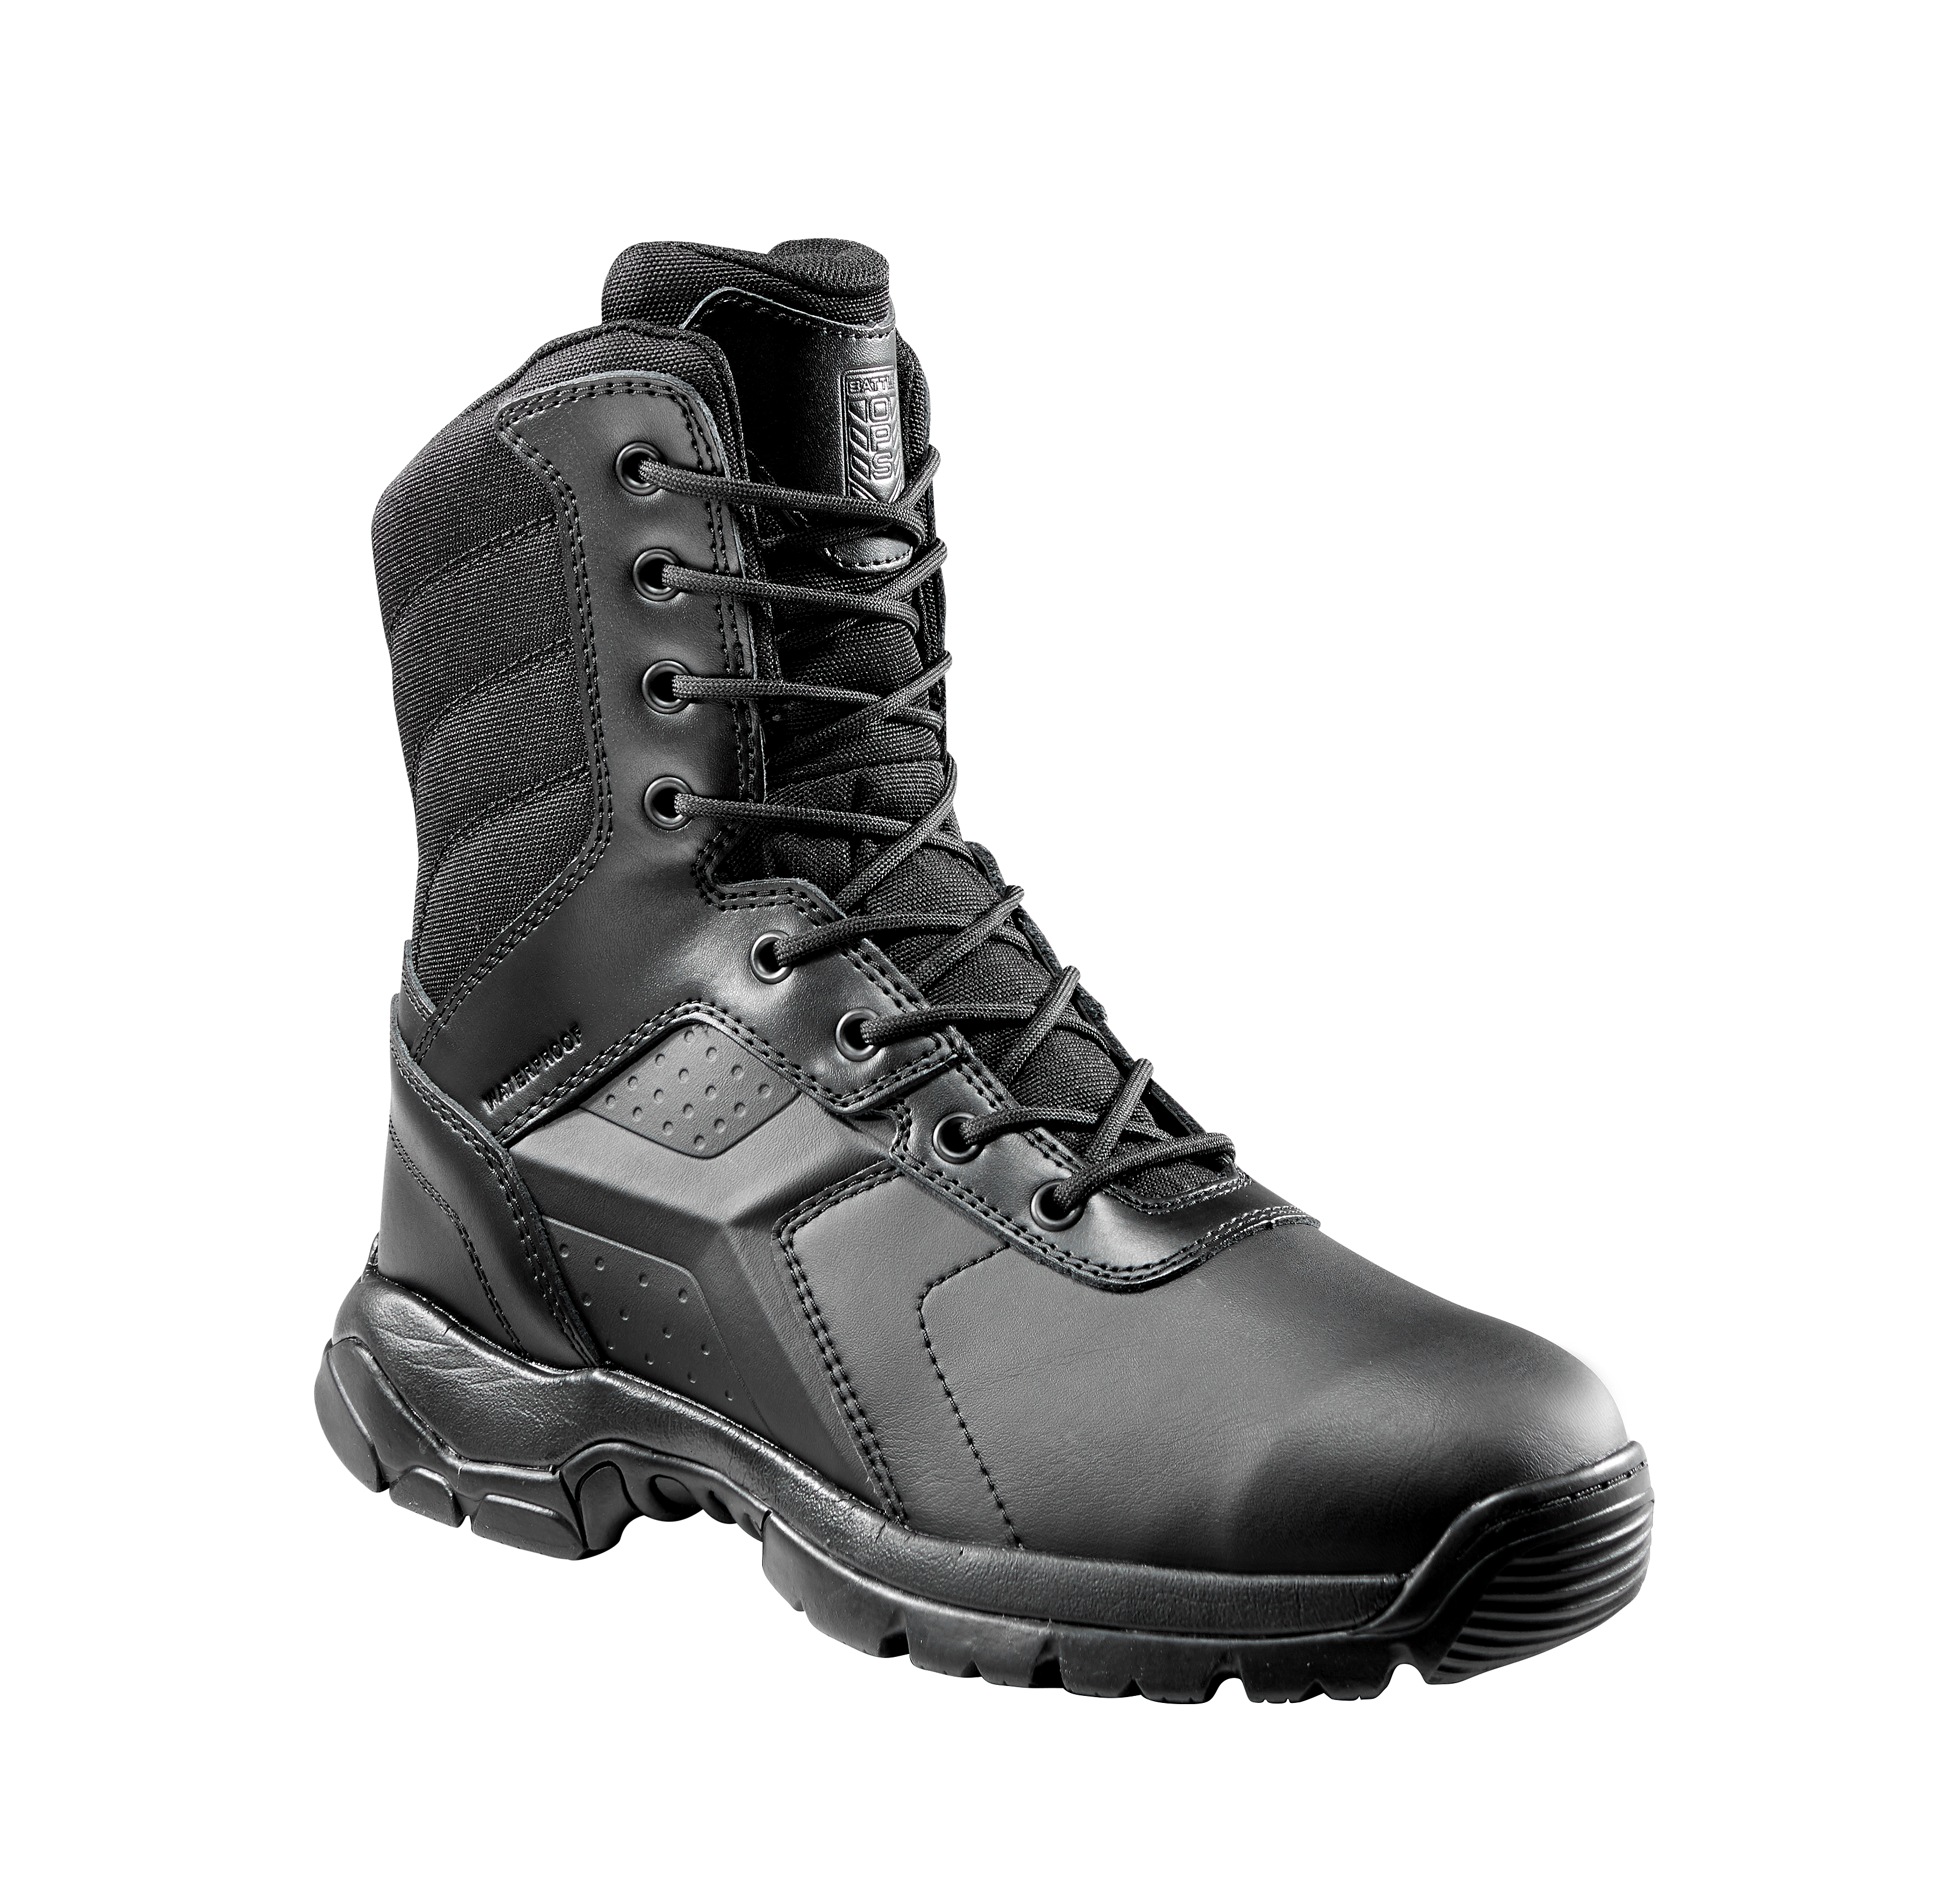 8-inch Waterproof Black Tactical Boot - Side Zip, Non Safety Toe